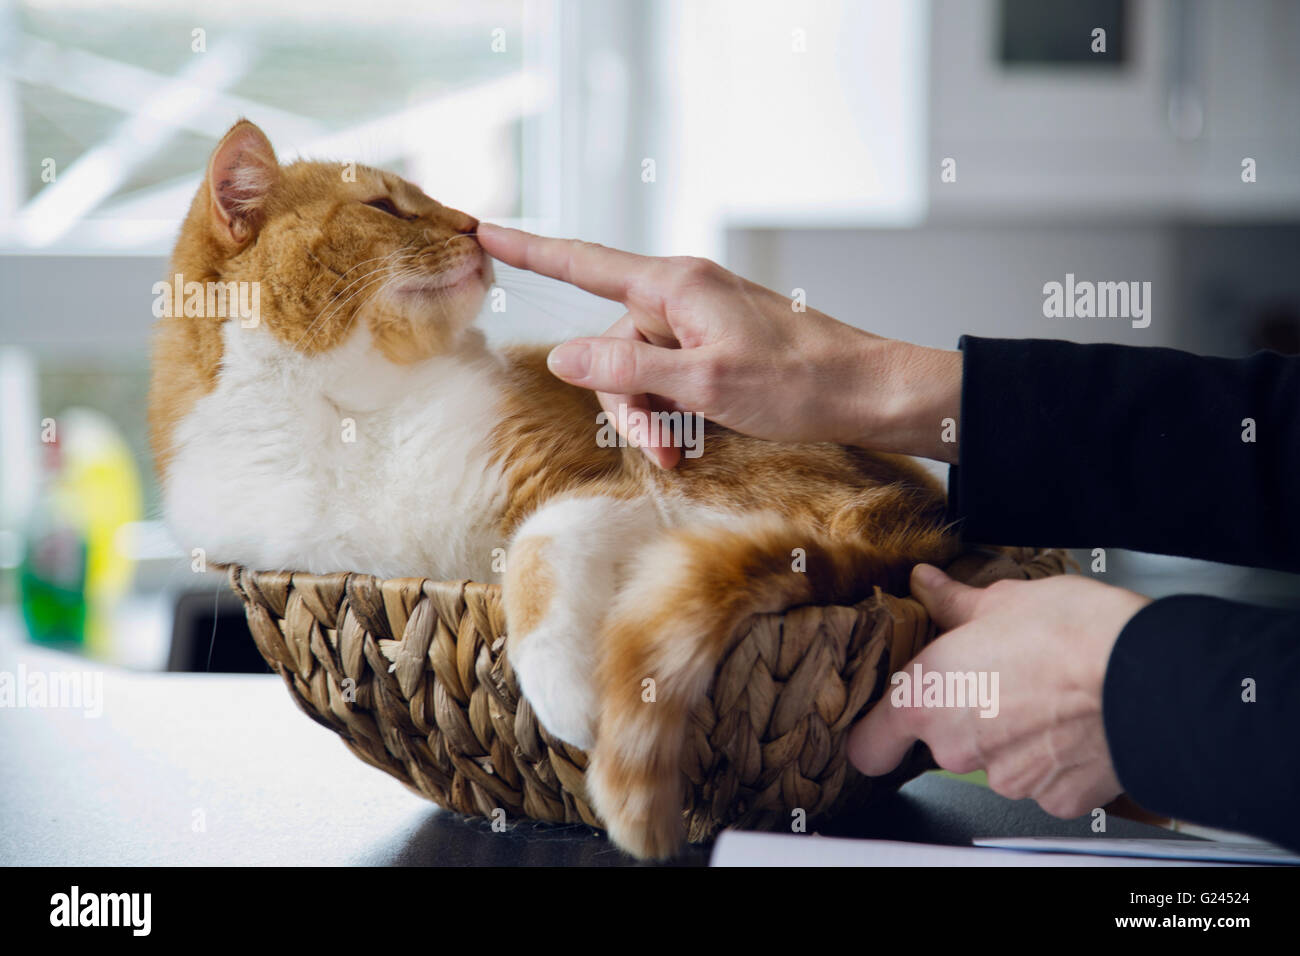 Finger touching the tip of a cat's nose. Stock Photo